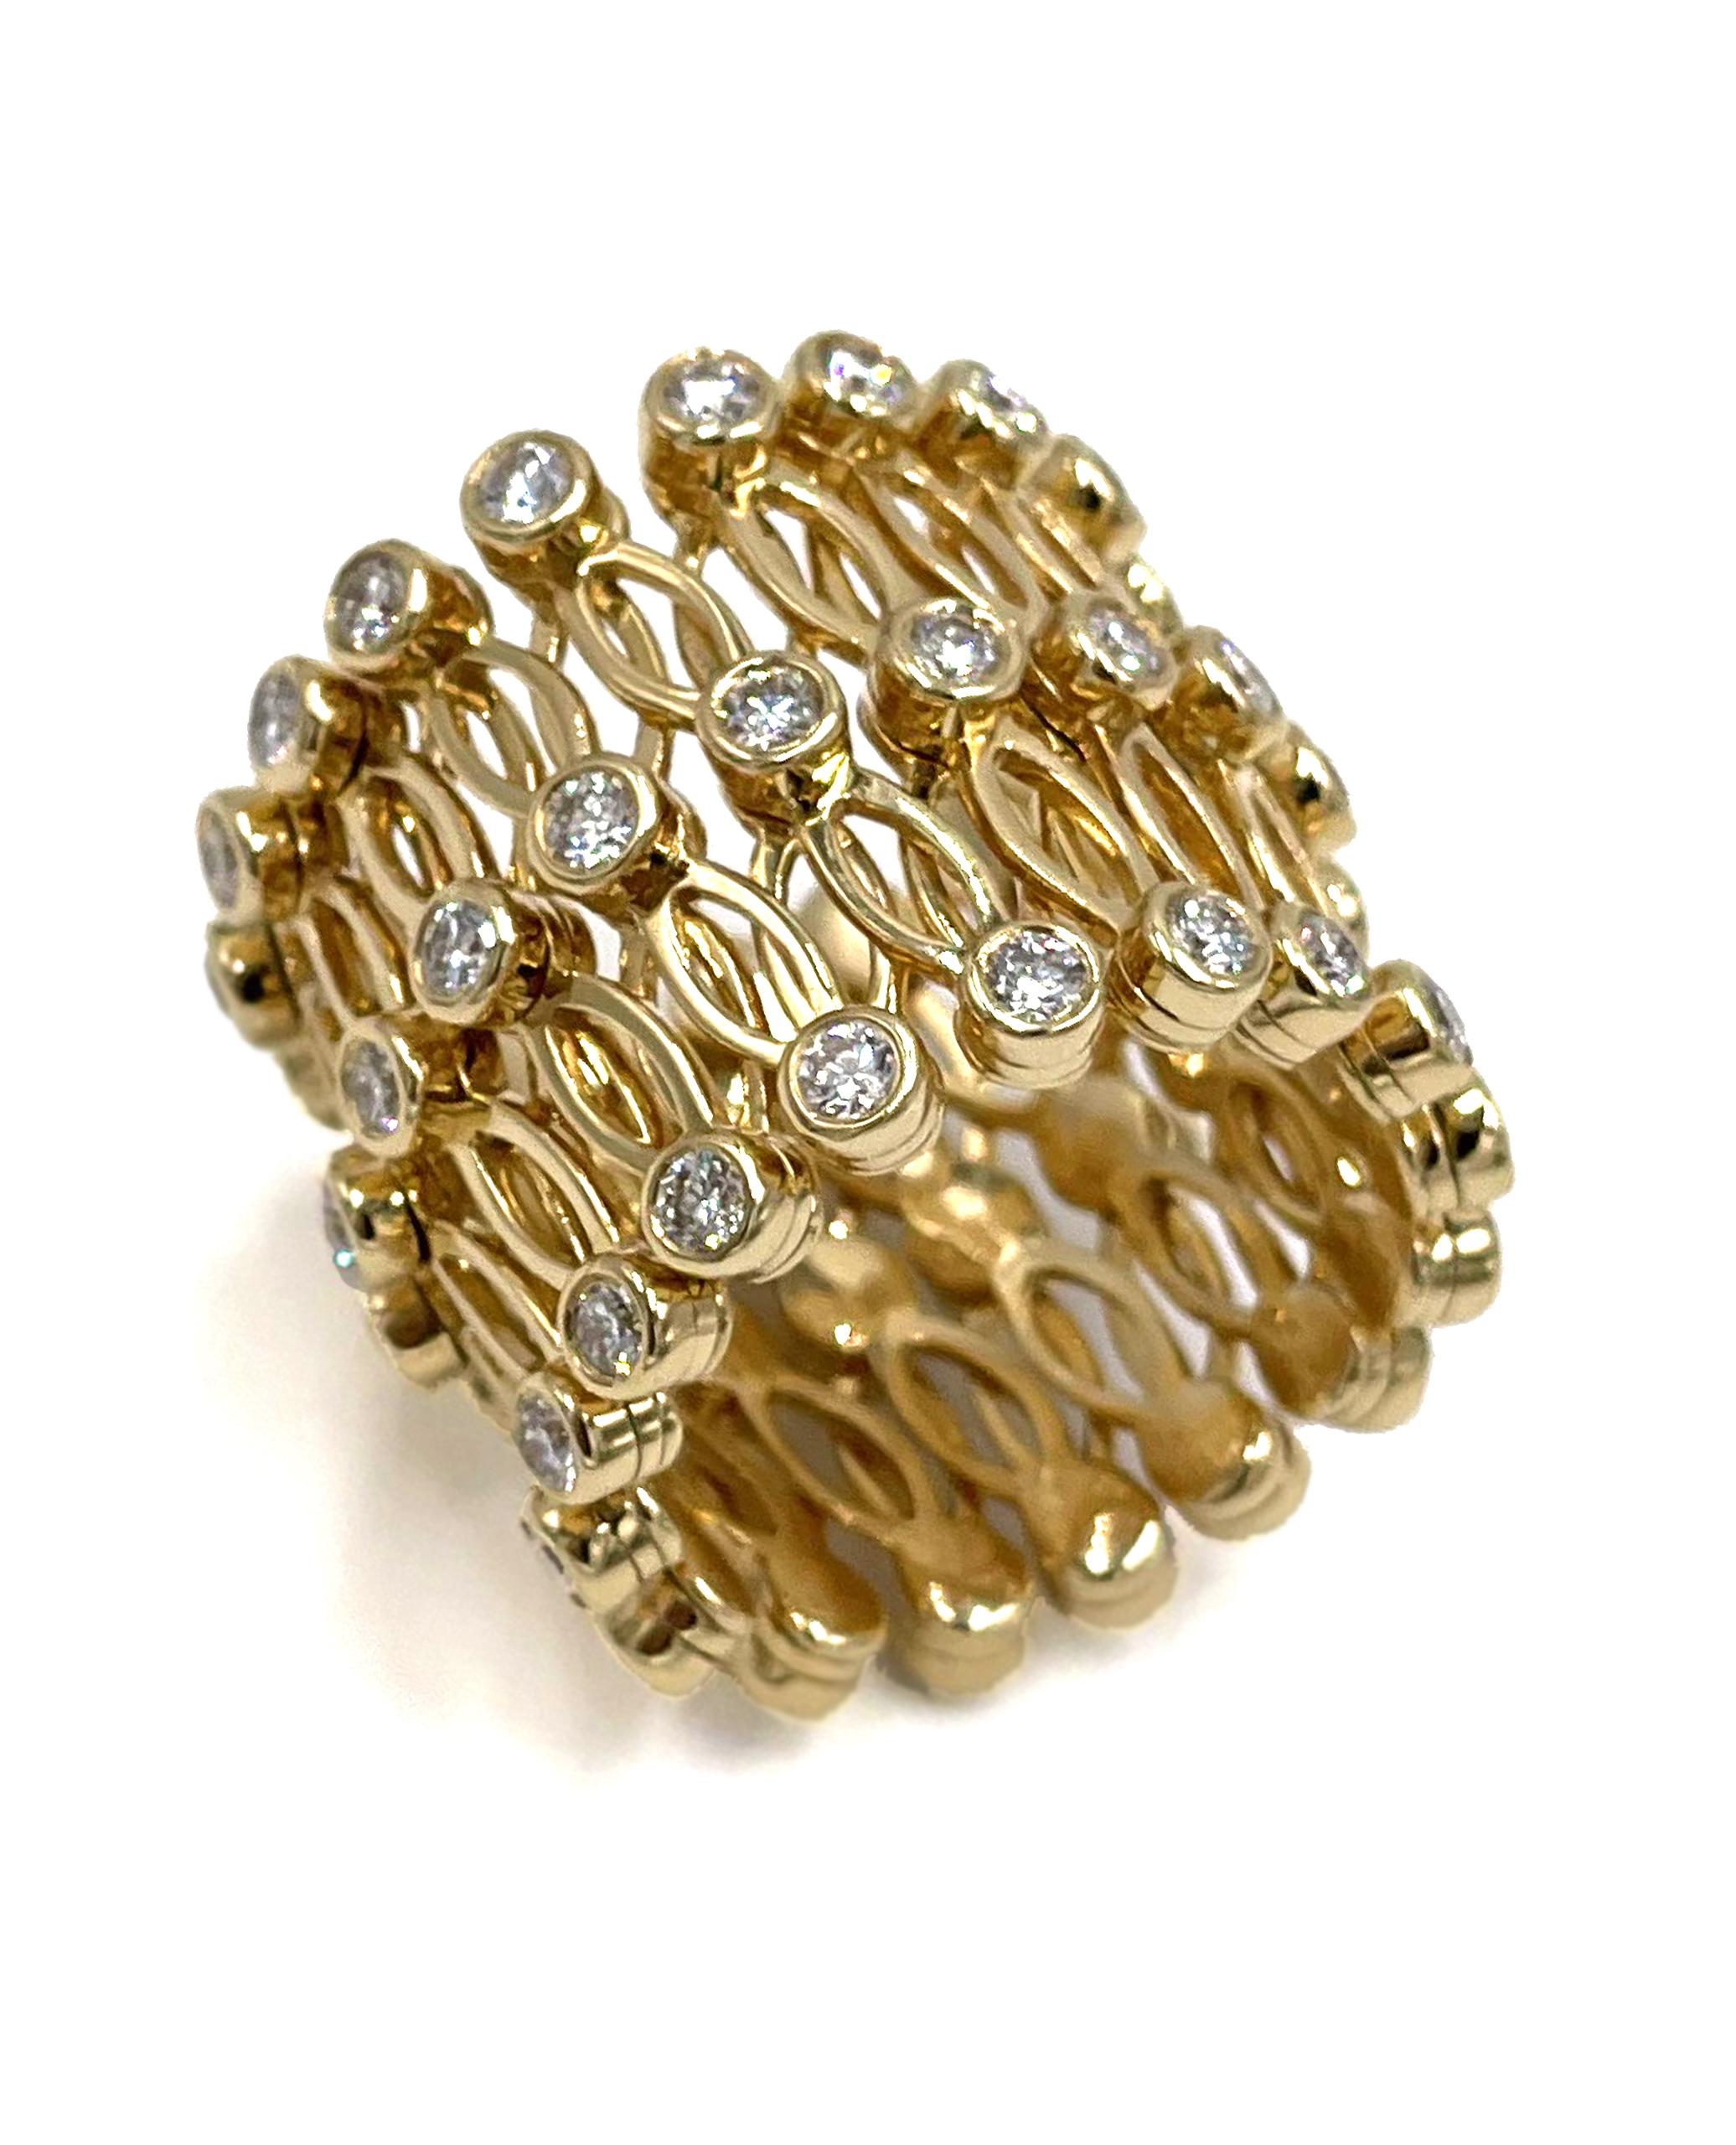 Round Cut Unique 18K Yellow Gold Convertible Ring to Bracelet with Diamonds